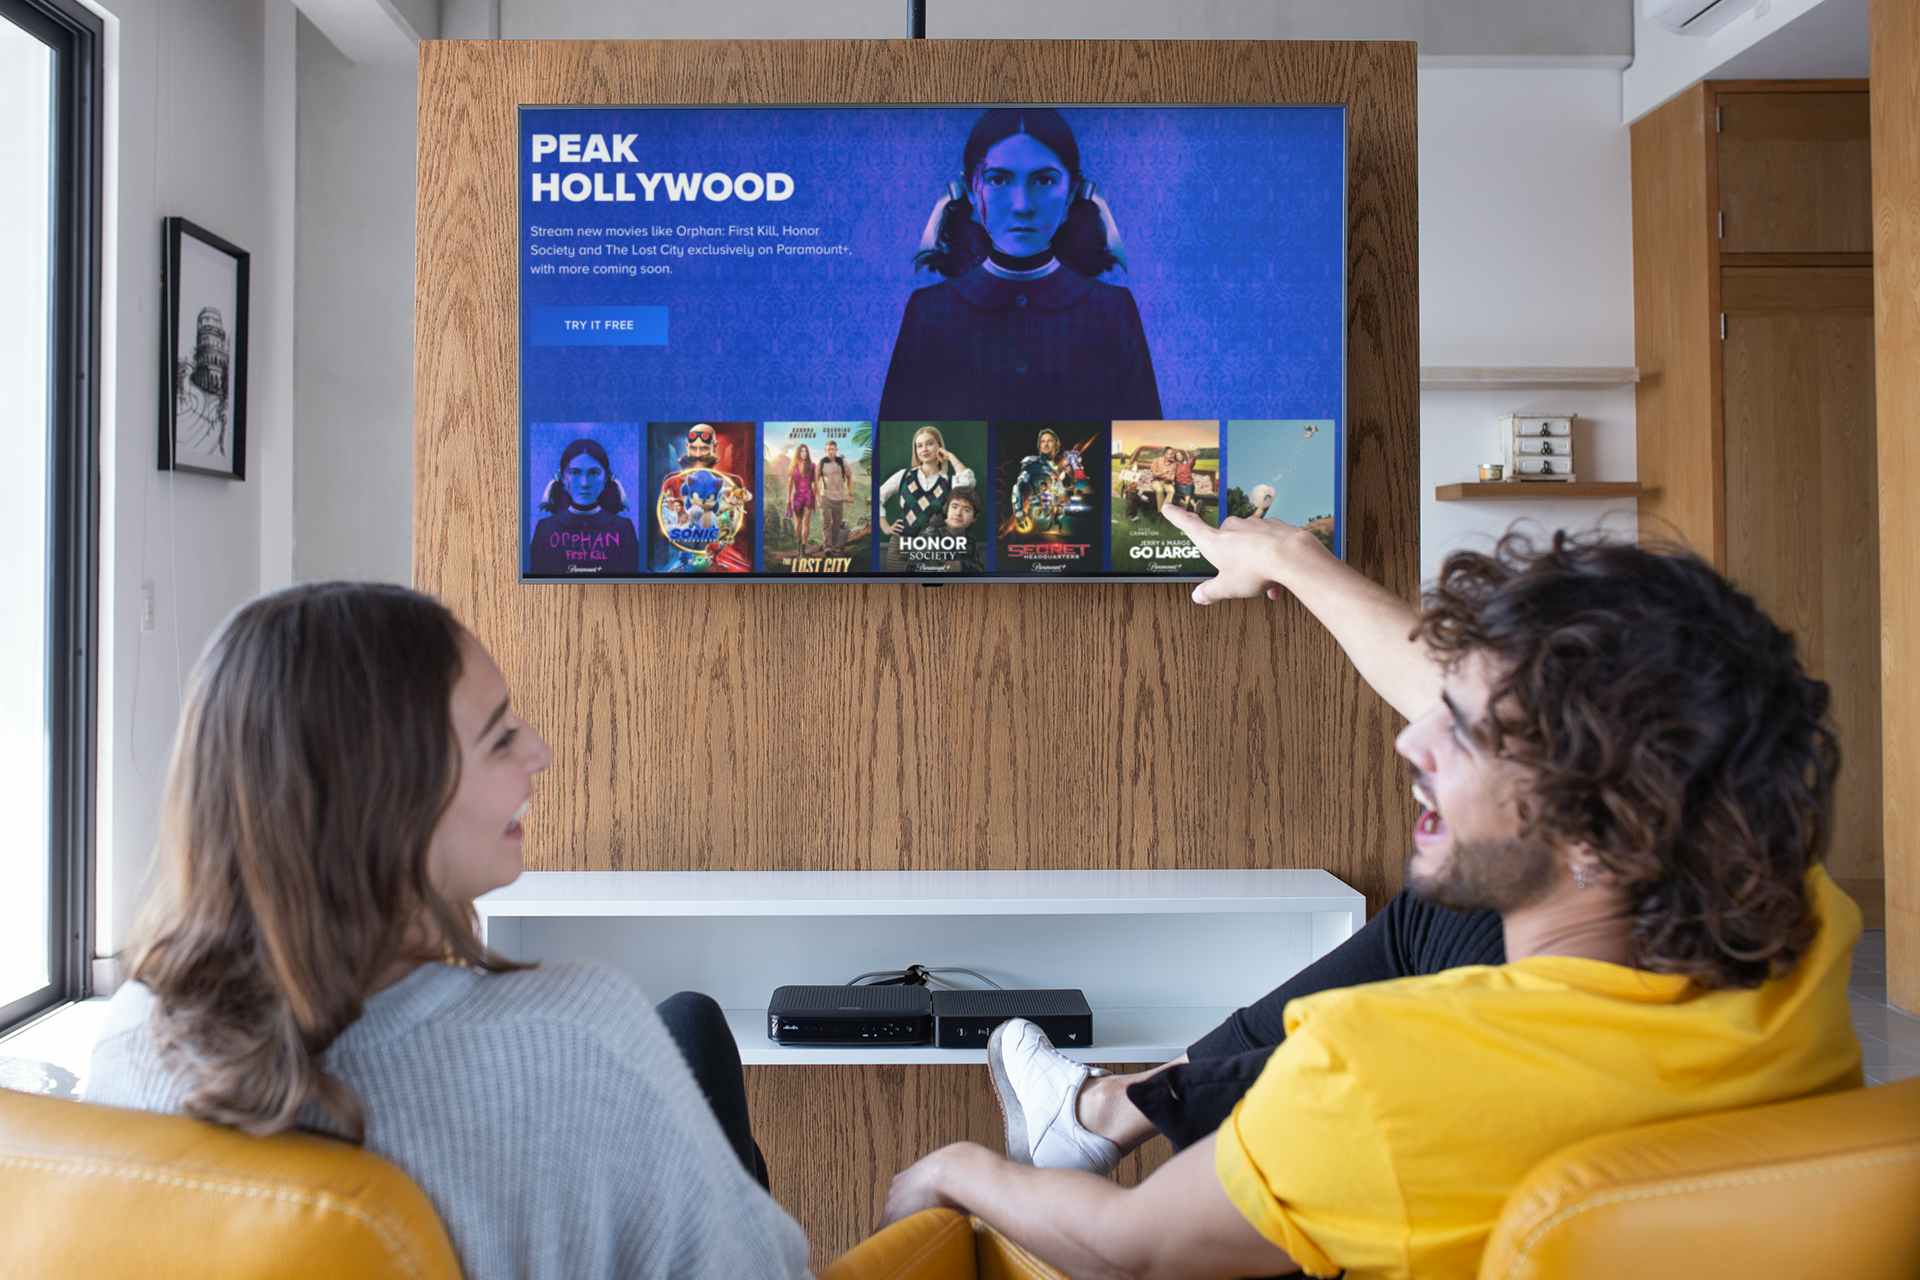 Two people looking at a mounted television. One person wearing a yellow shirt is smiling pointing at the tv screen